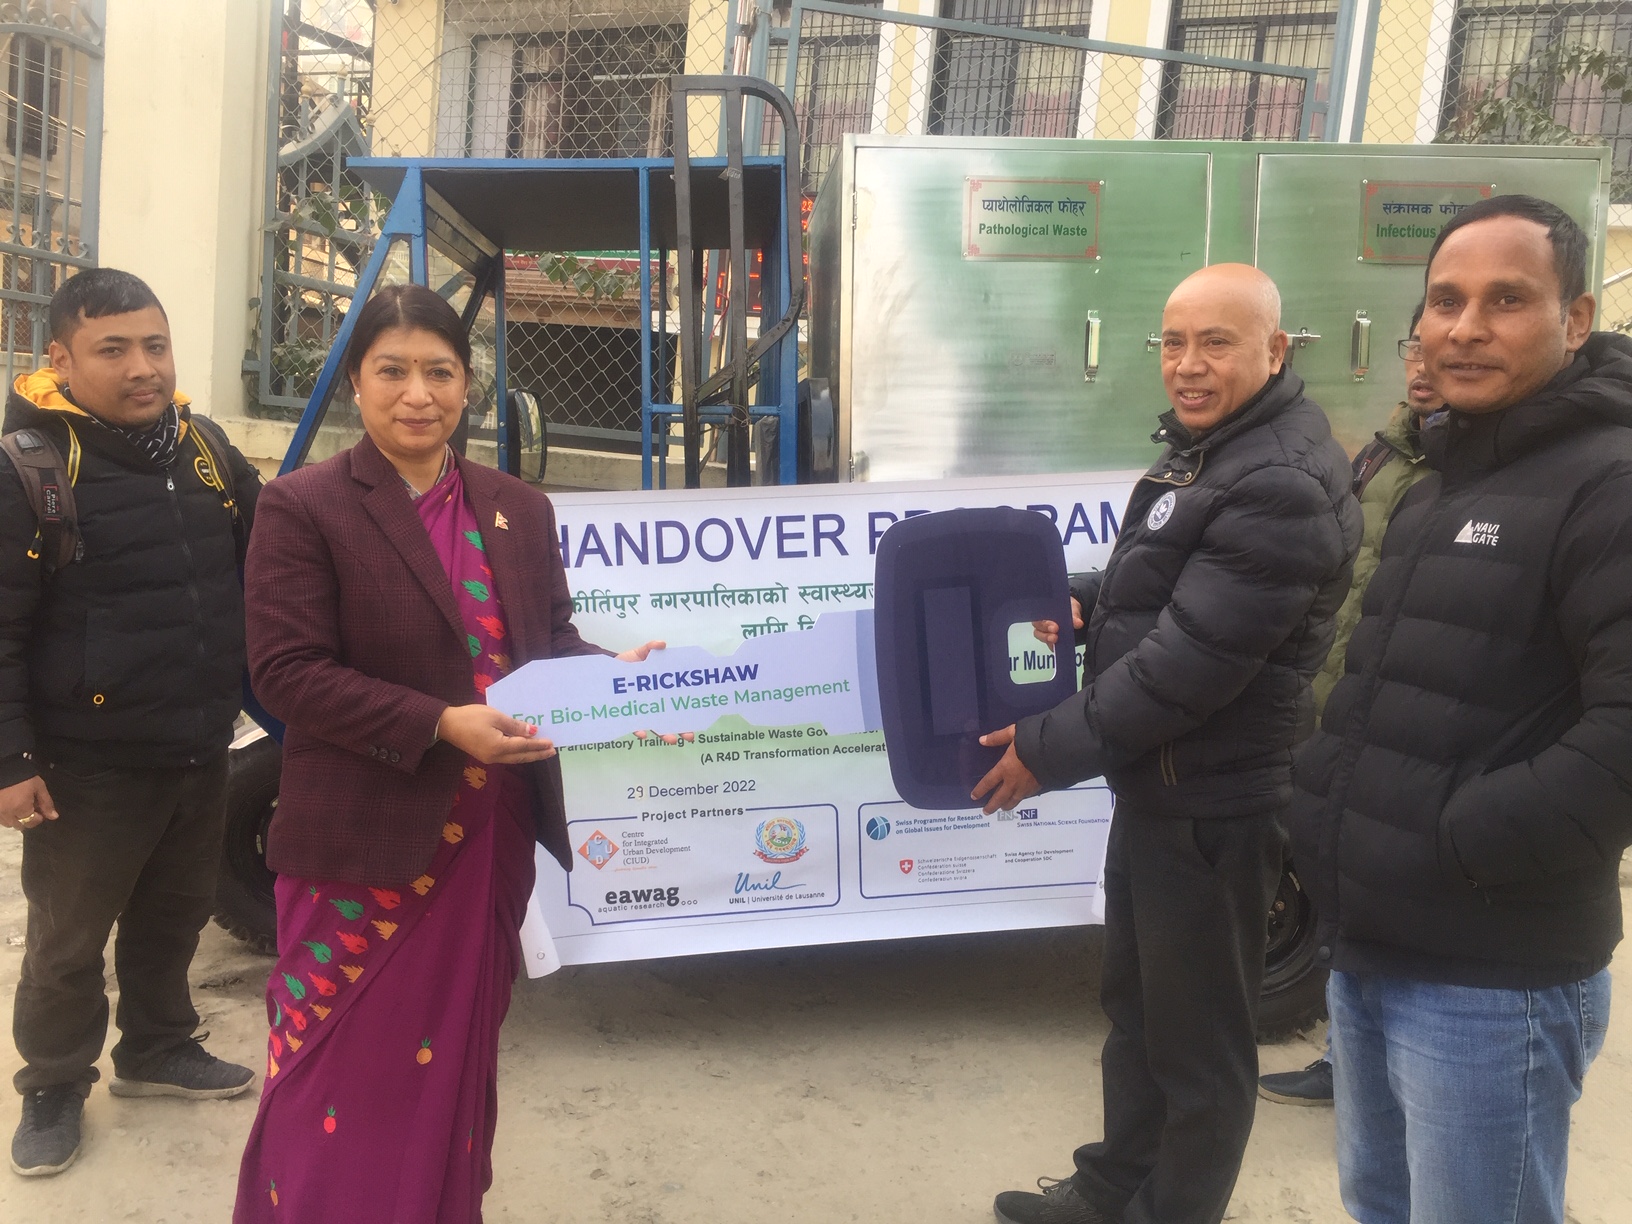 Handover of an E-Rickshaw for Centralized Bio-Medical Waste Management in Kirtipur Municipality